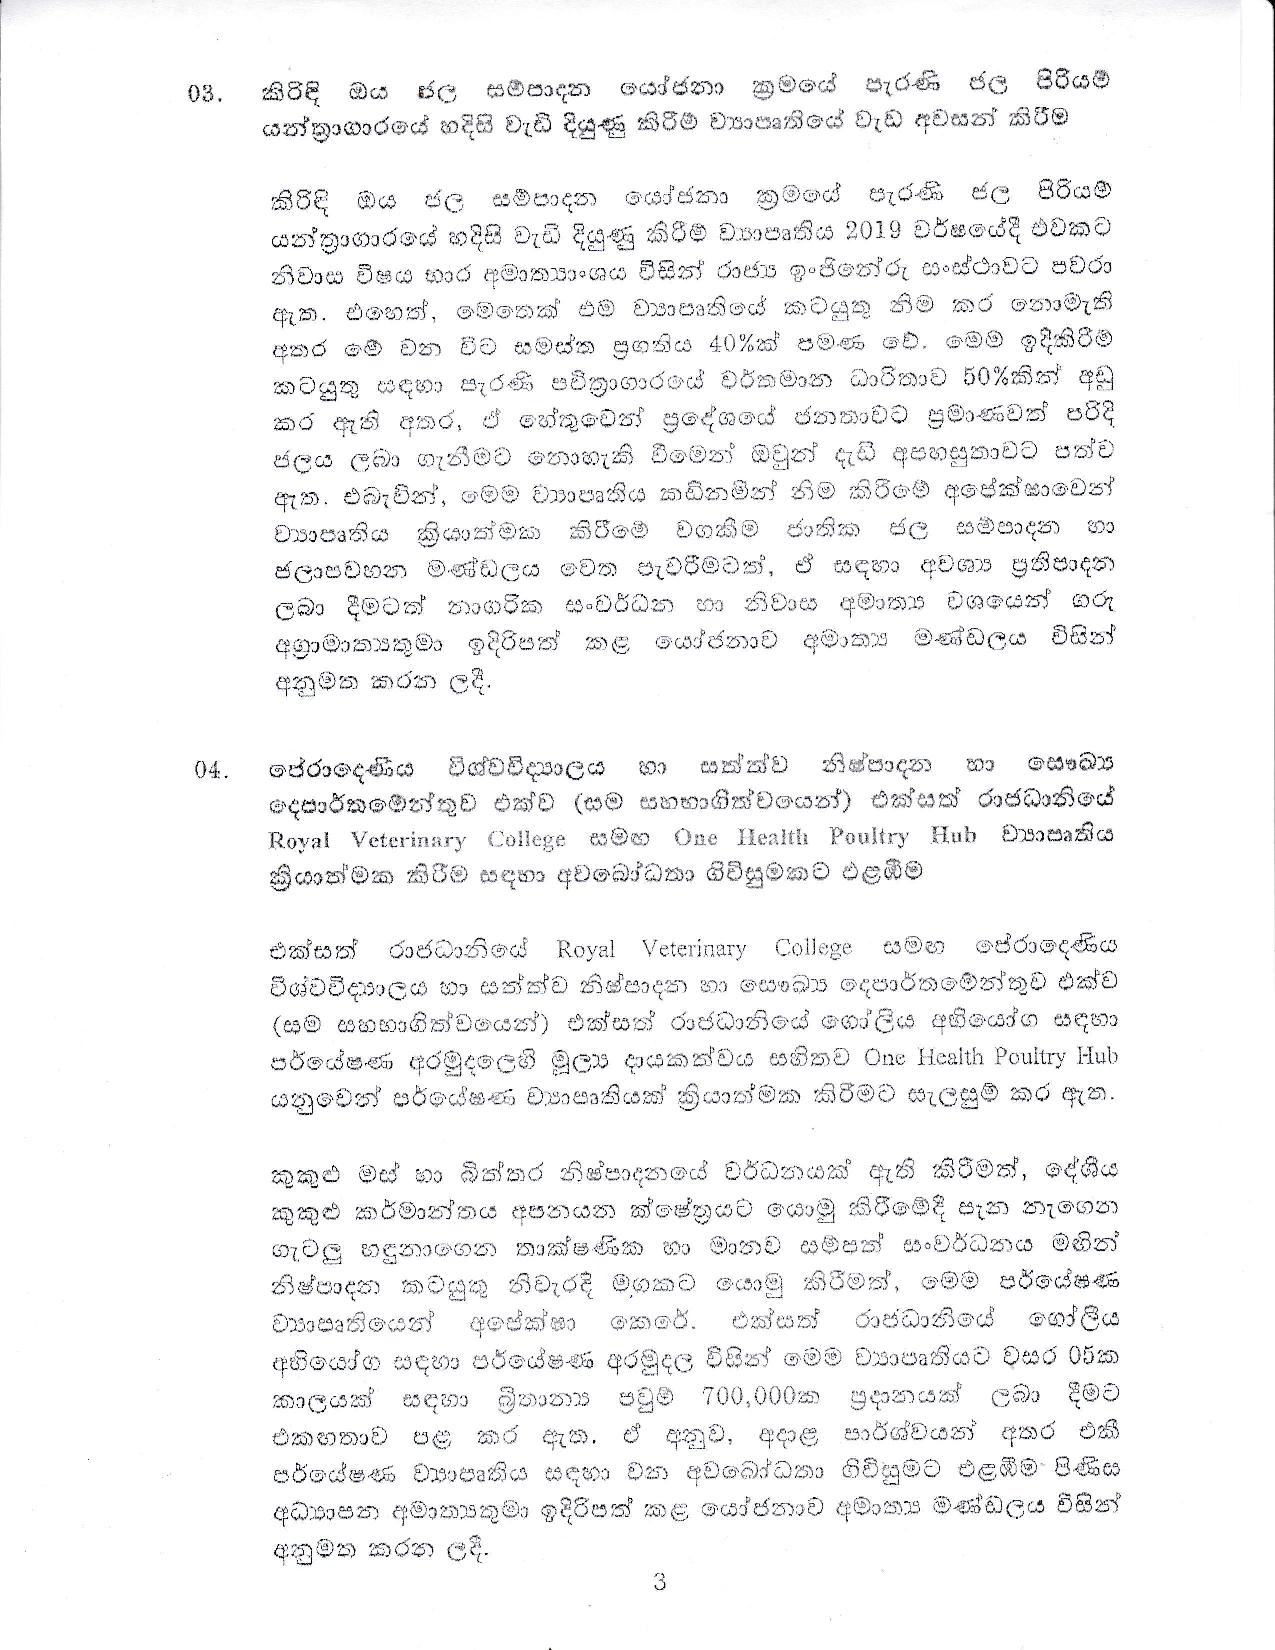 Cabinet Decision on 28.09.2020 page 003